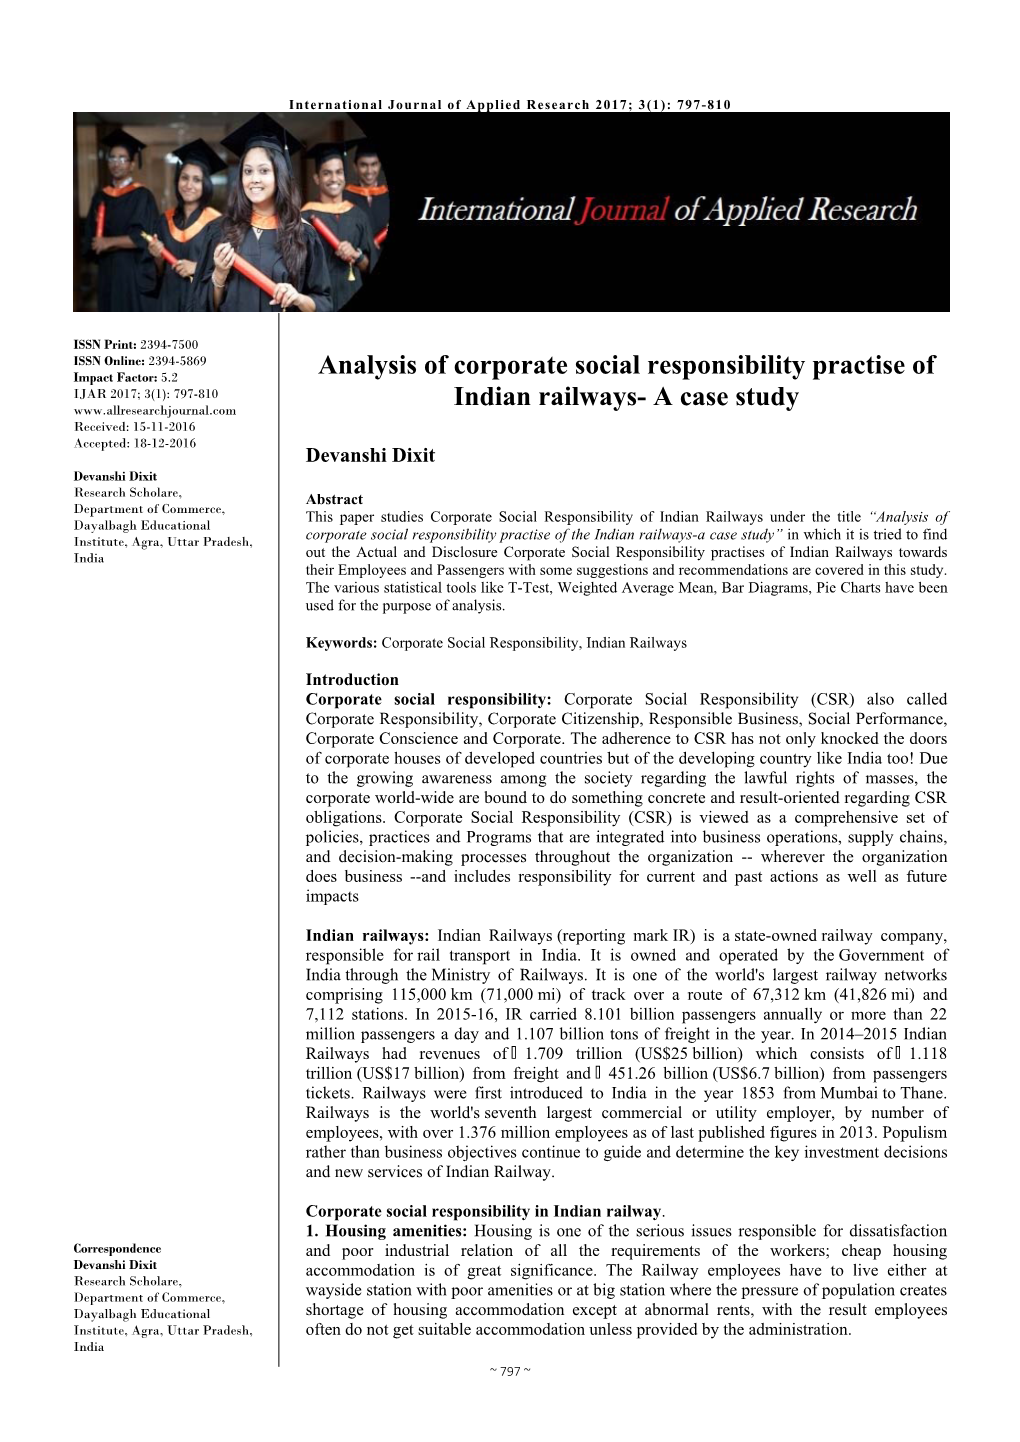 Analysis of Corporate Social Responsibility Practise of Indian